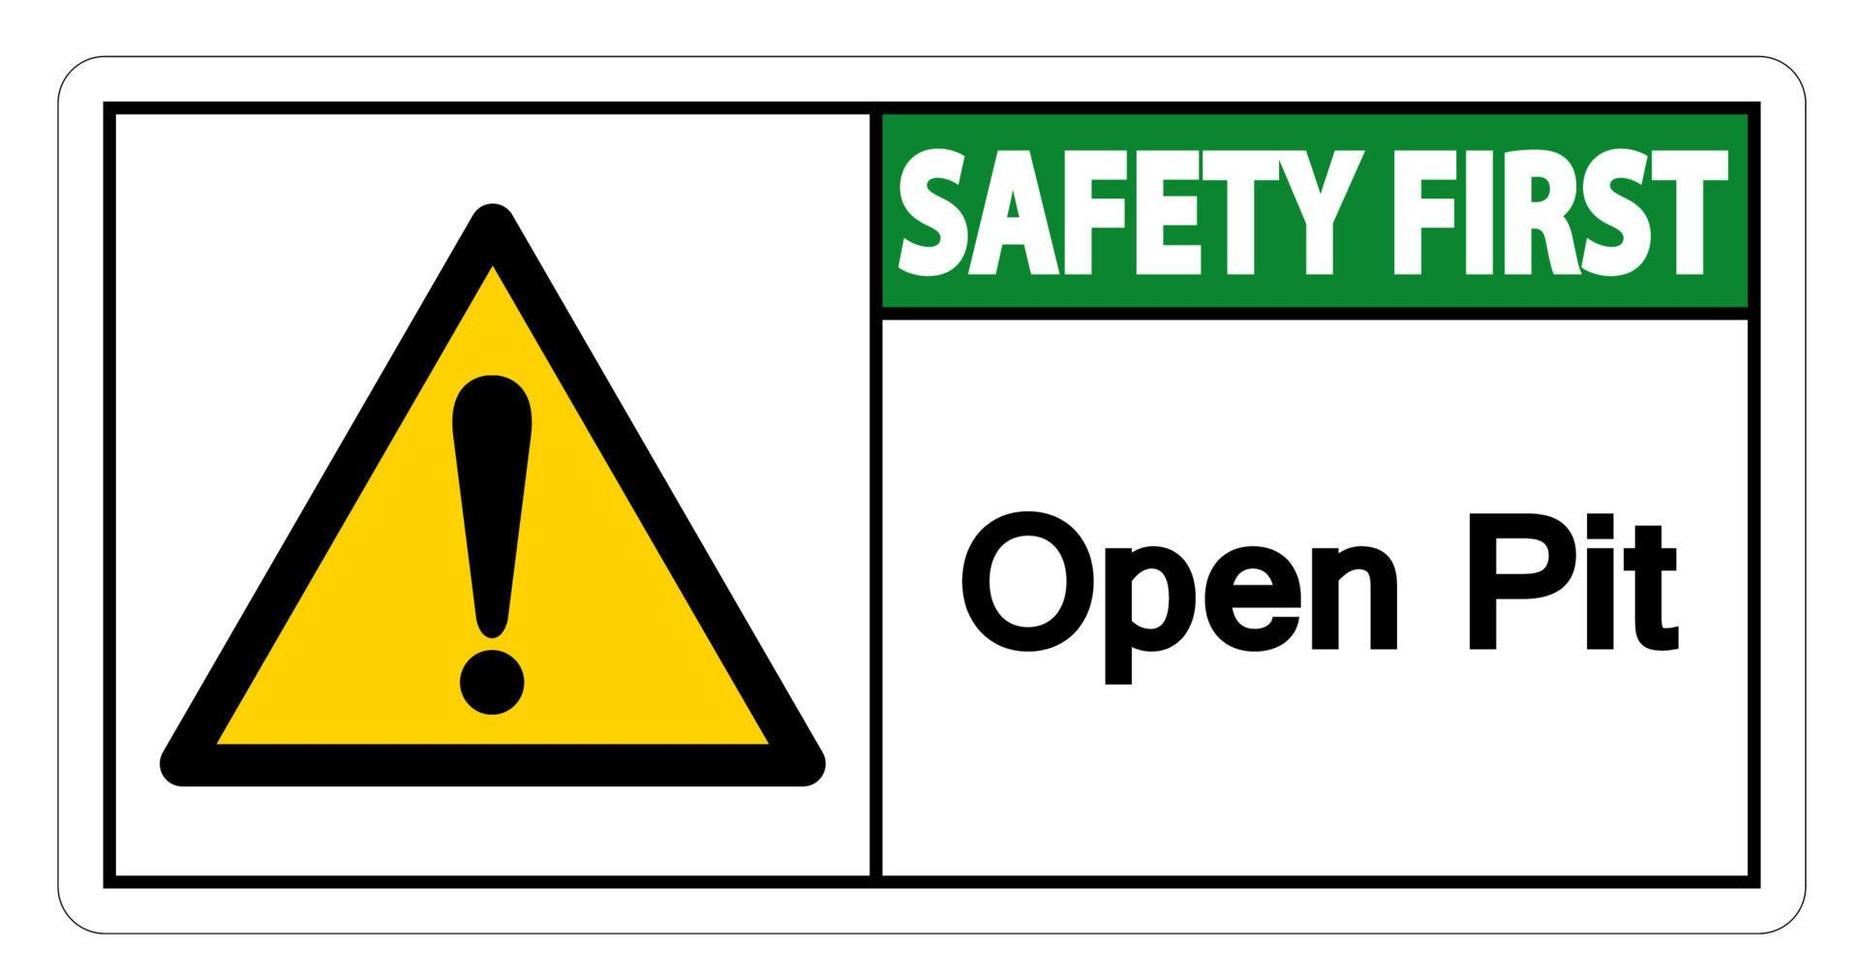 Safety first Open Pit Symbol Sign on white background vector